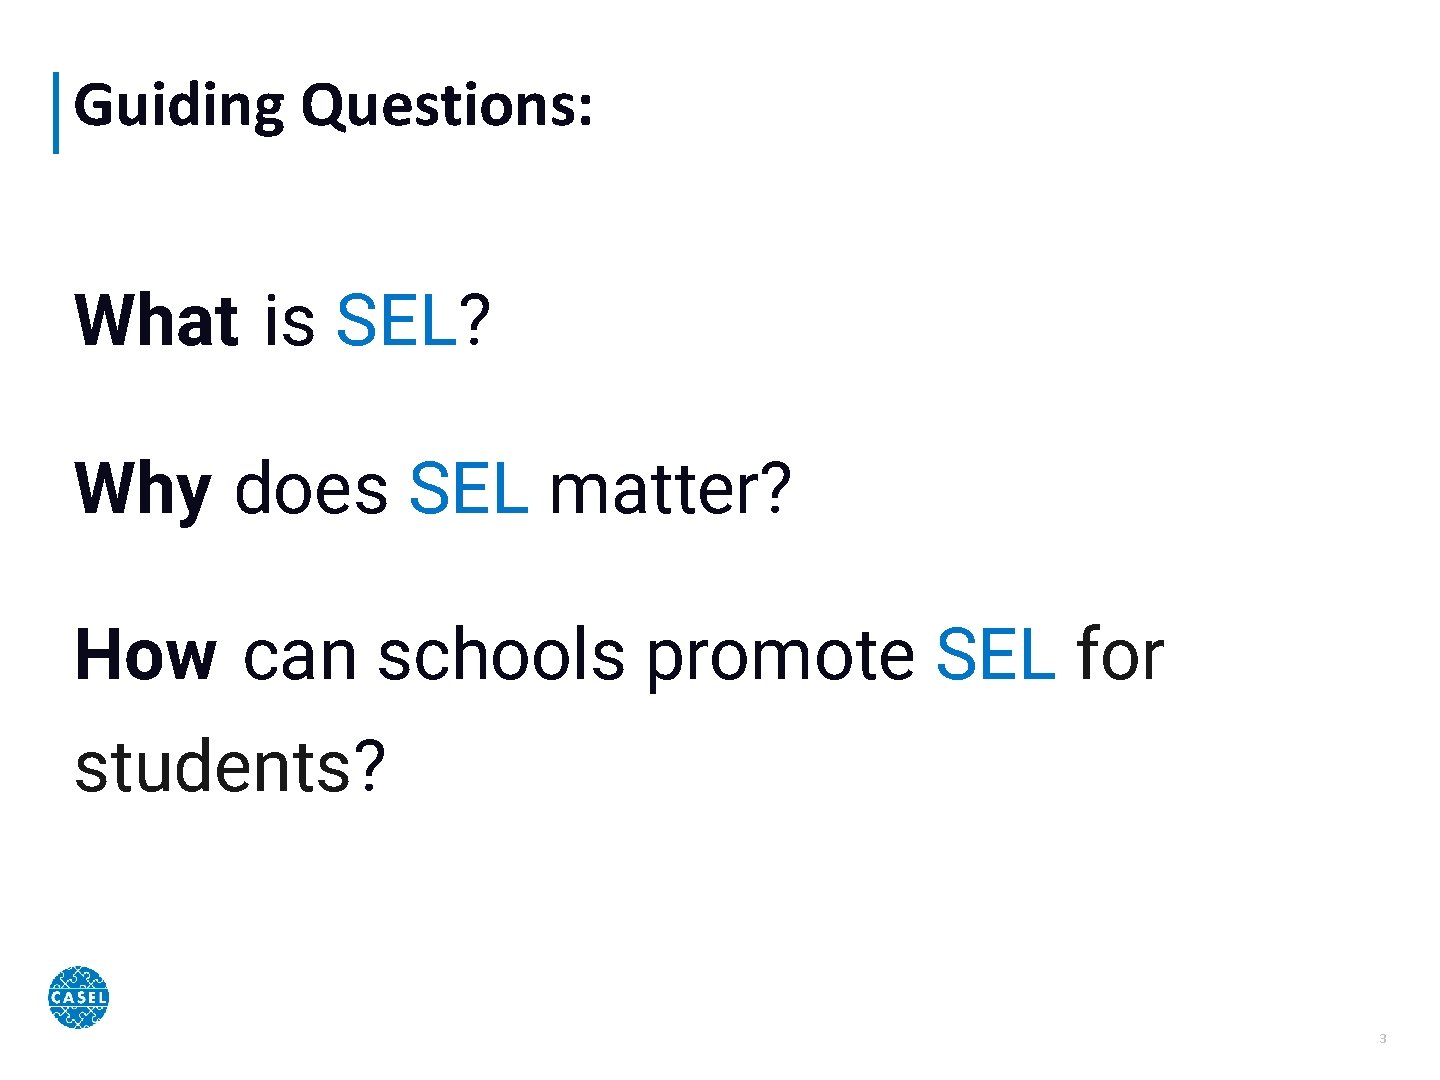 Guiding Questions: What is SEL? Why does SEL matter? How can schools promote SEL